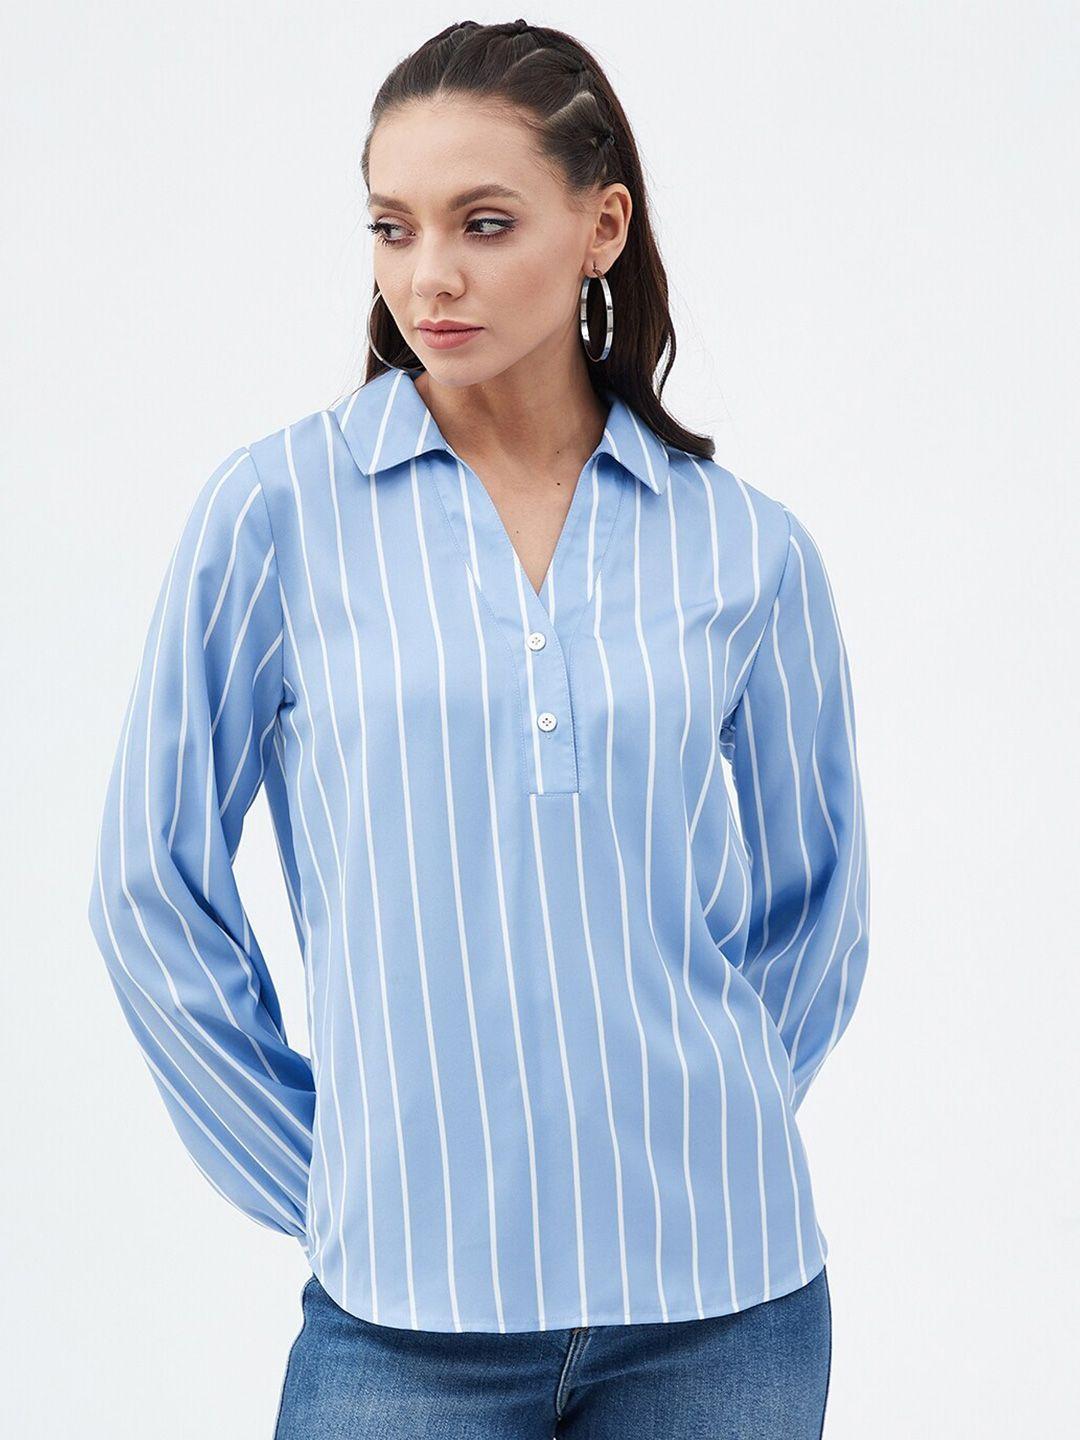 harpa striped cuffed sleeves shirt style top